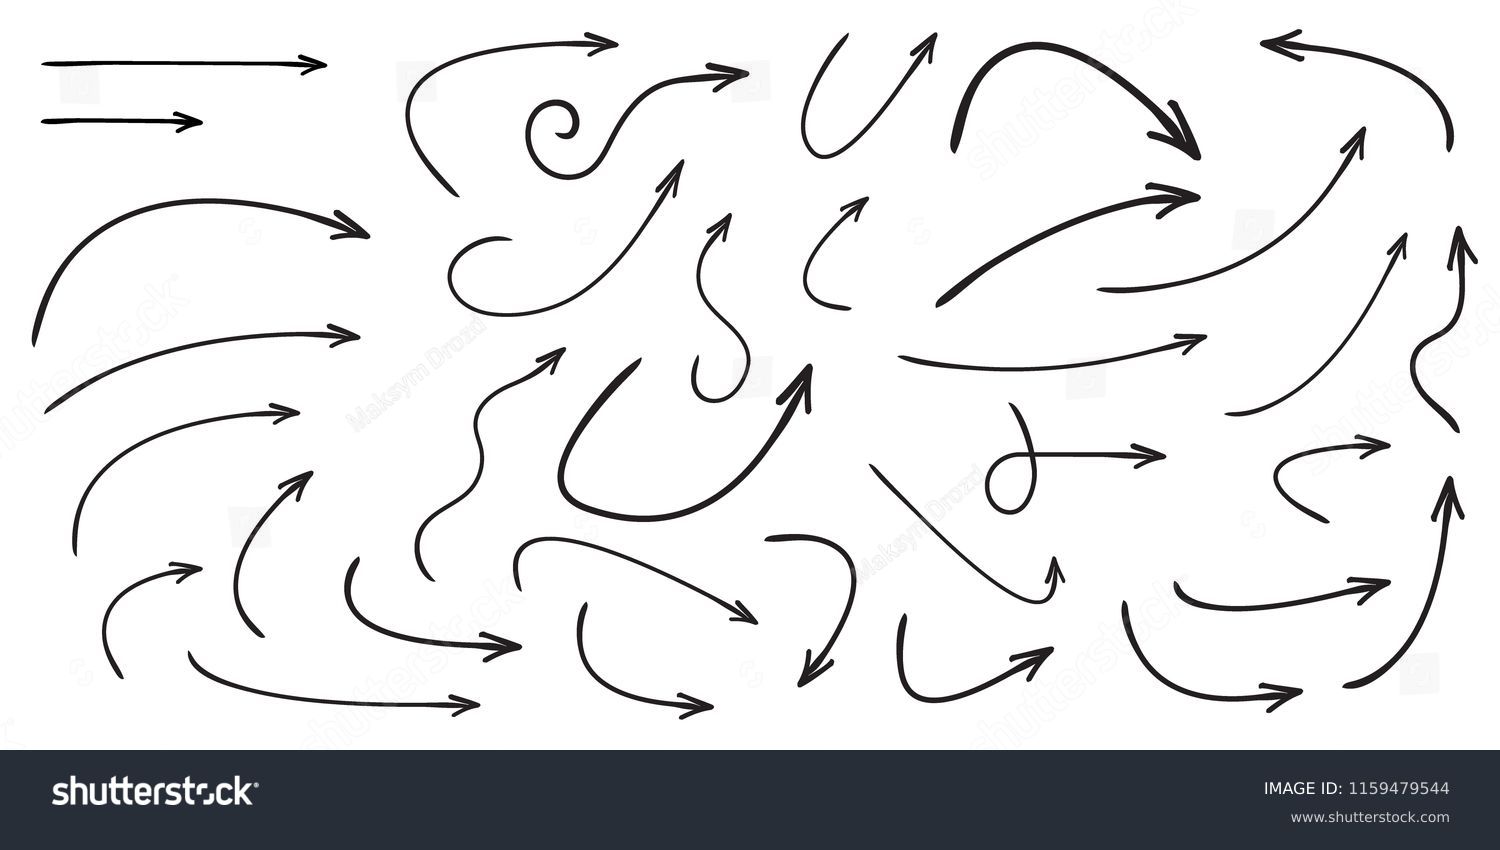 Set of vector curved arrows hand drawn. Sketch doodle style. Collection of pointers. #1159479544